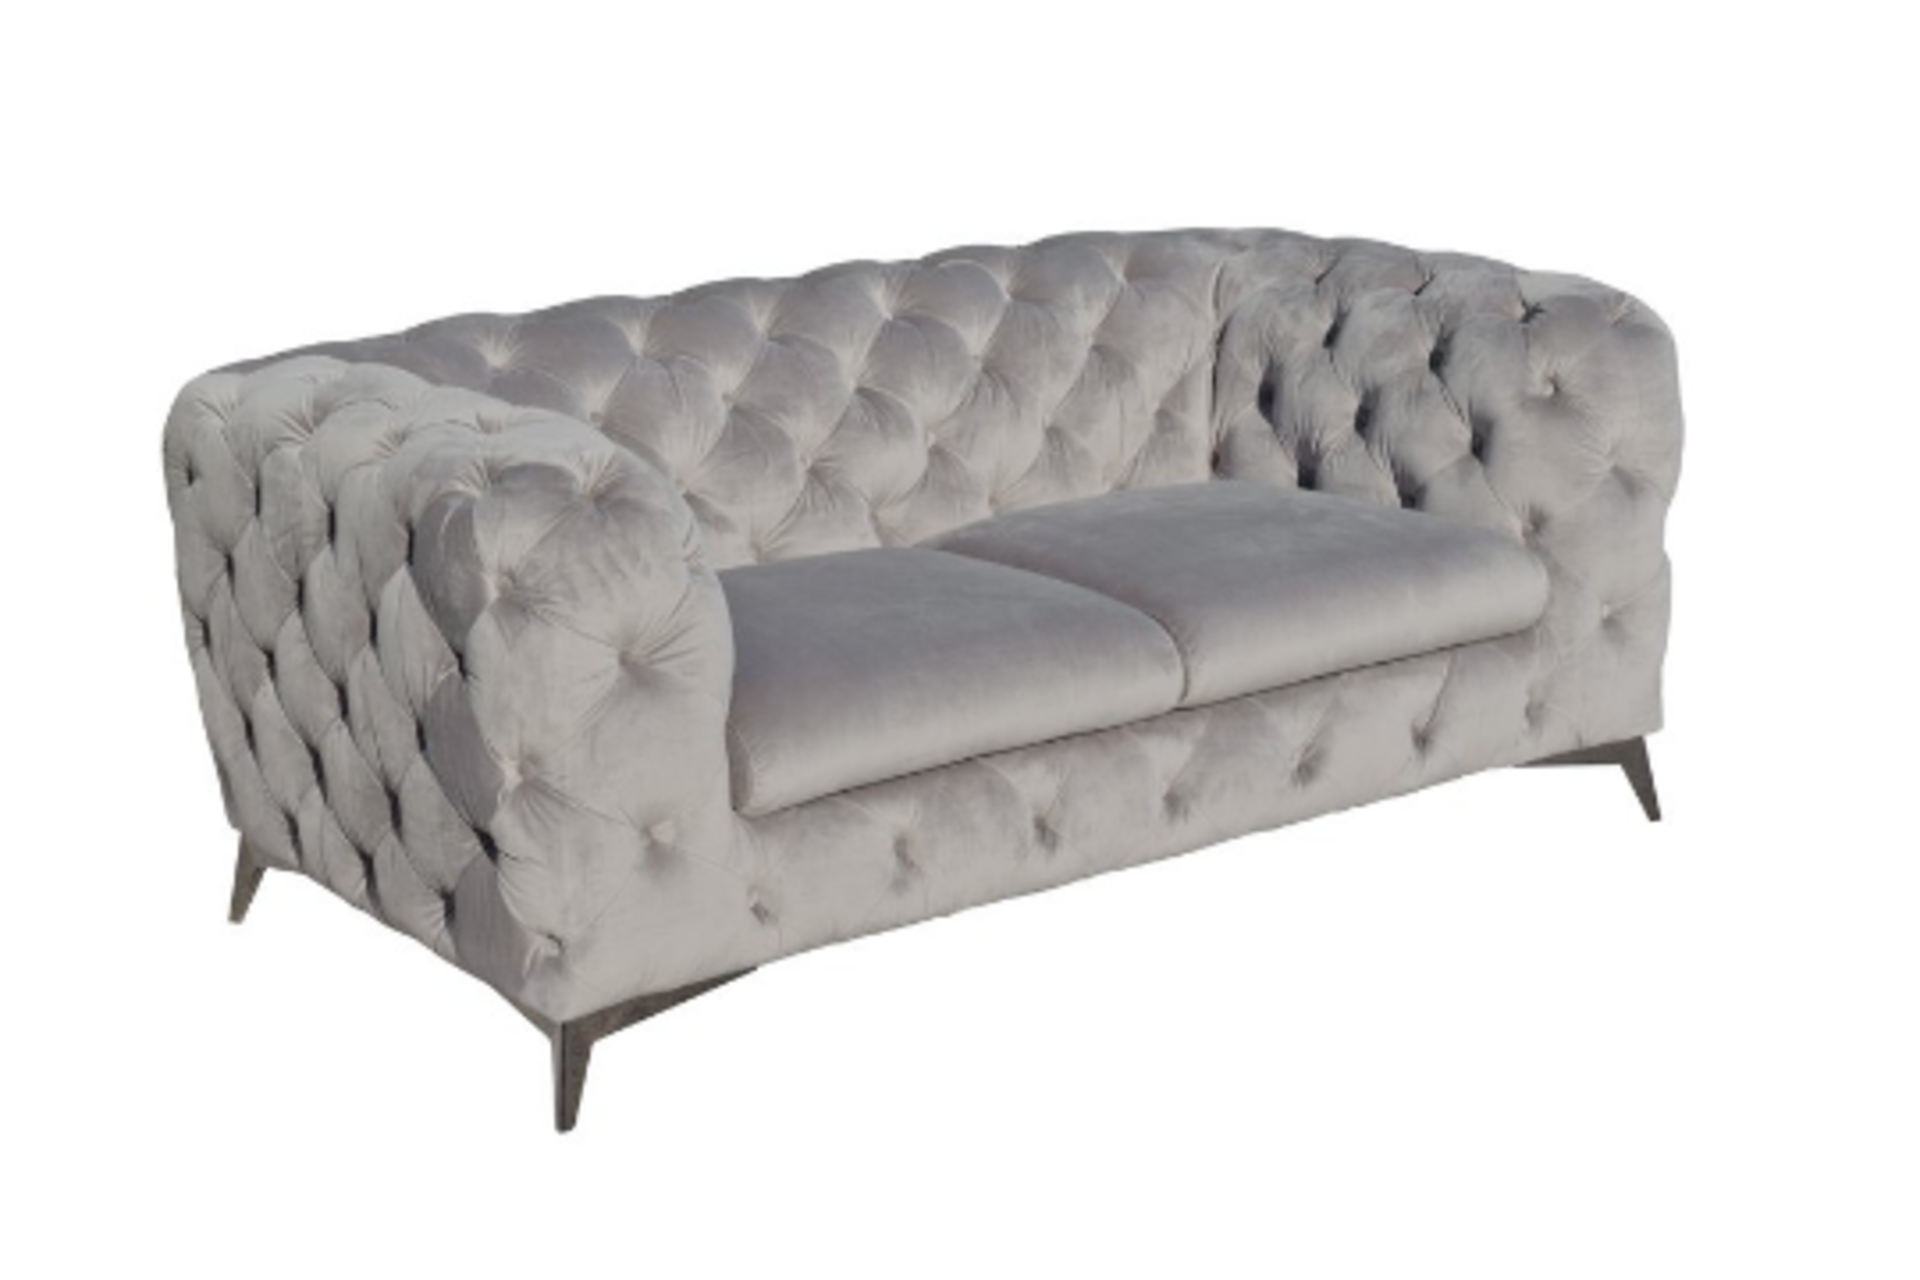 Plush Velvet Chesterfield 2 Seater Sofa Luxurious Couch Silver Grey Wayfair, Appears New - Image 2 of 3